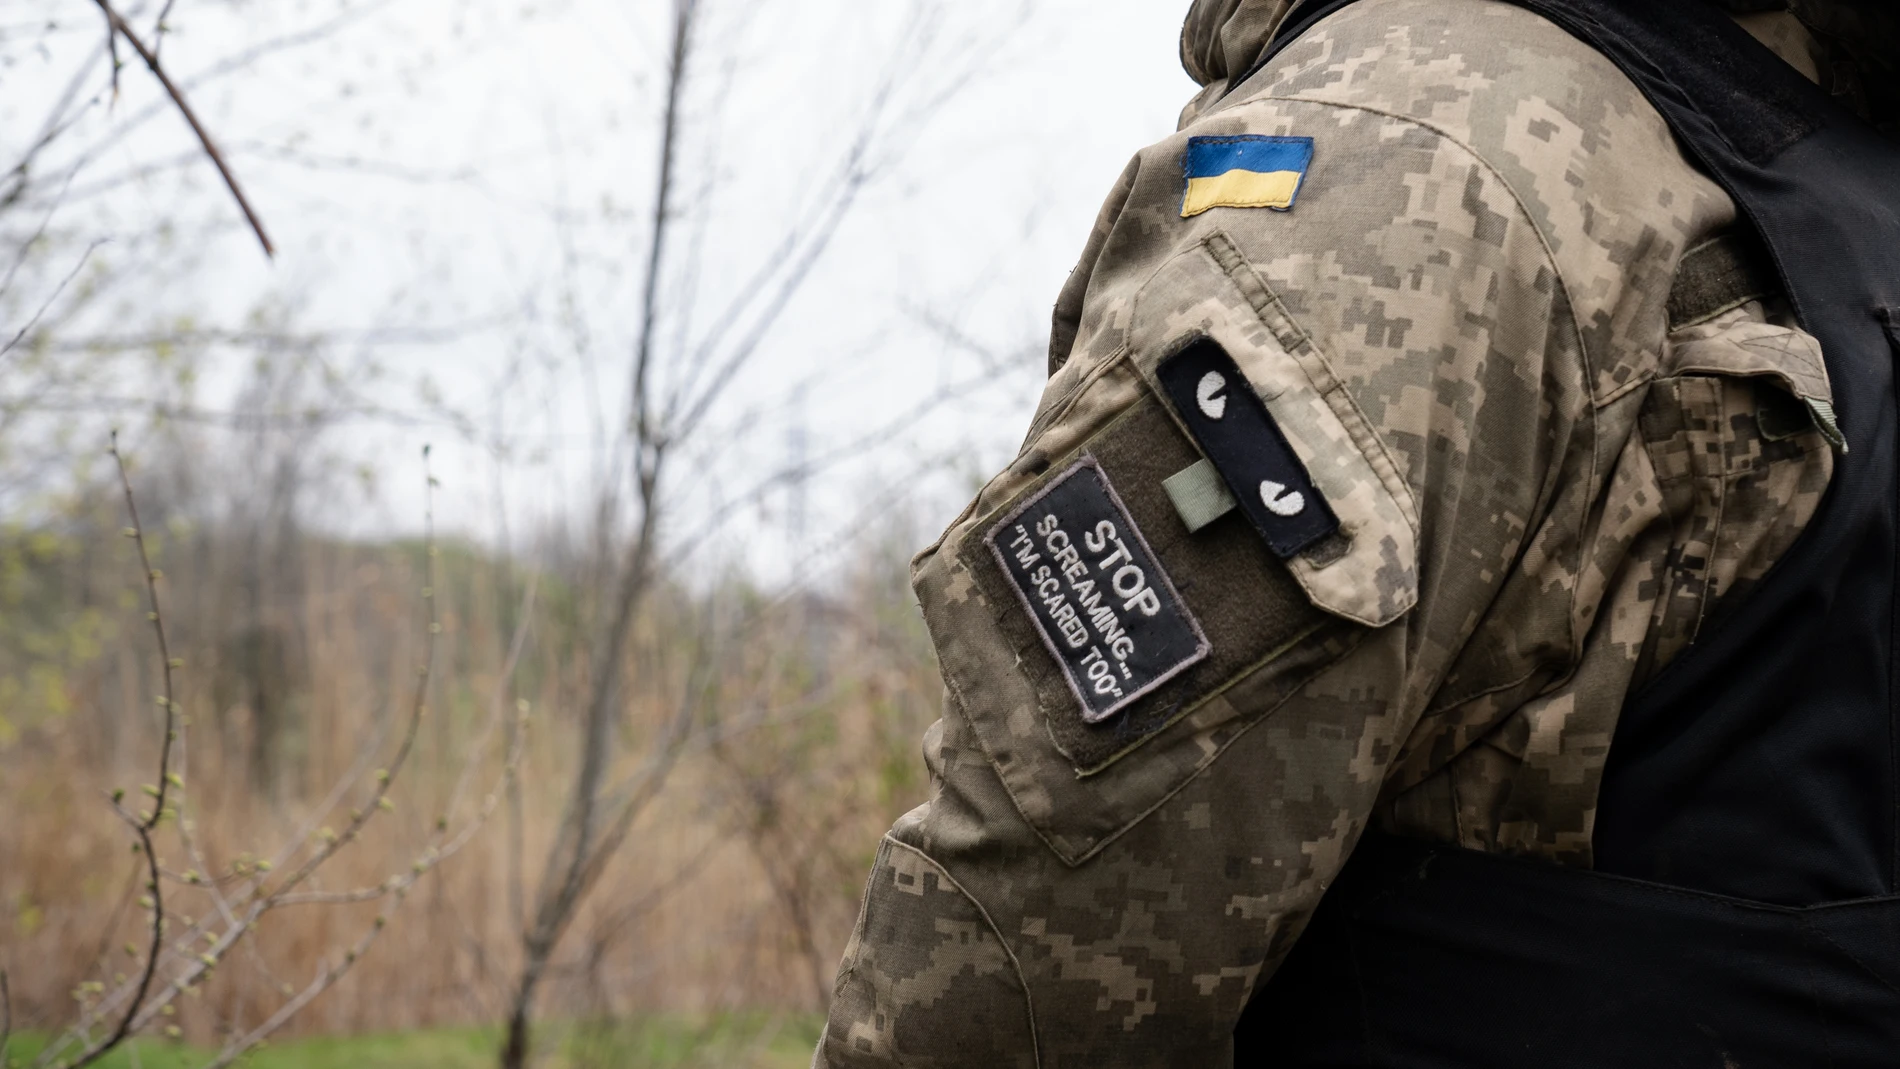 April 15, 2023, Bakhmut, Ukraine: A patch written 'stop screaming â€?I'm scared too'' is seen on a Ukrainian soldier's army uniform, alongside a Ukrainian flag in the Ukrainian position near Bakhmut. Ukrainian armed force is fighting intensely in Bakhmut and the surrounding area as Russian forces are getting ever closer to taking the eastern city of Ukraine. The battle of Bakhmut is now known as 'the bloodiest' and 'one of the longest fight', it has become one of the most significant fights in the war between Ukraine and Russia. 15/04/2023